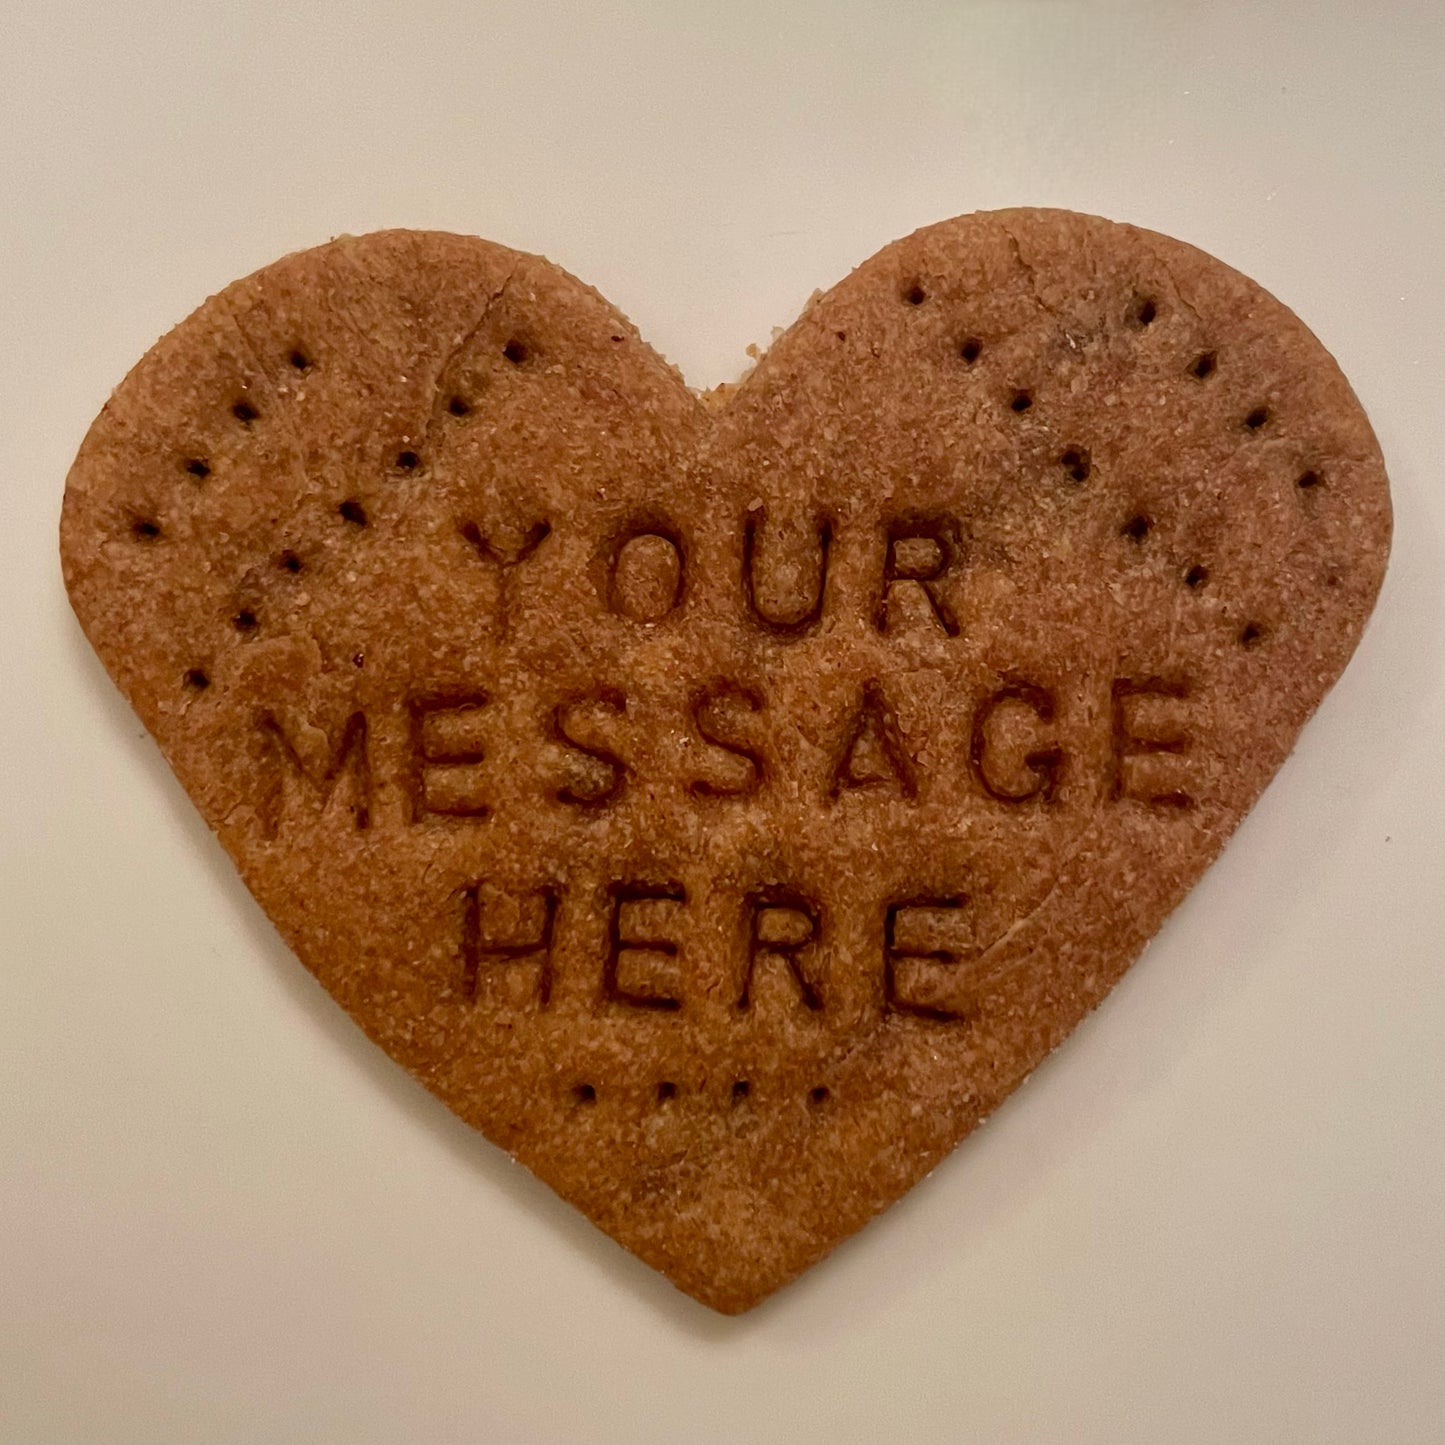 A dog cookie in the shape of a heart with "Your Message Here" personalized on it.